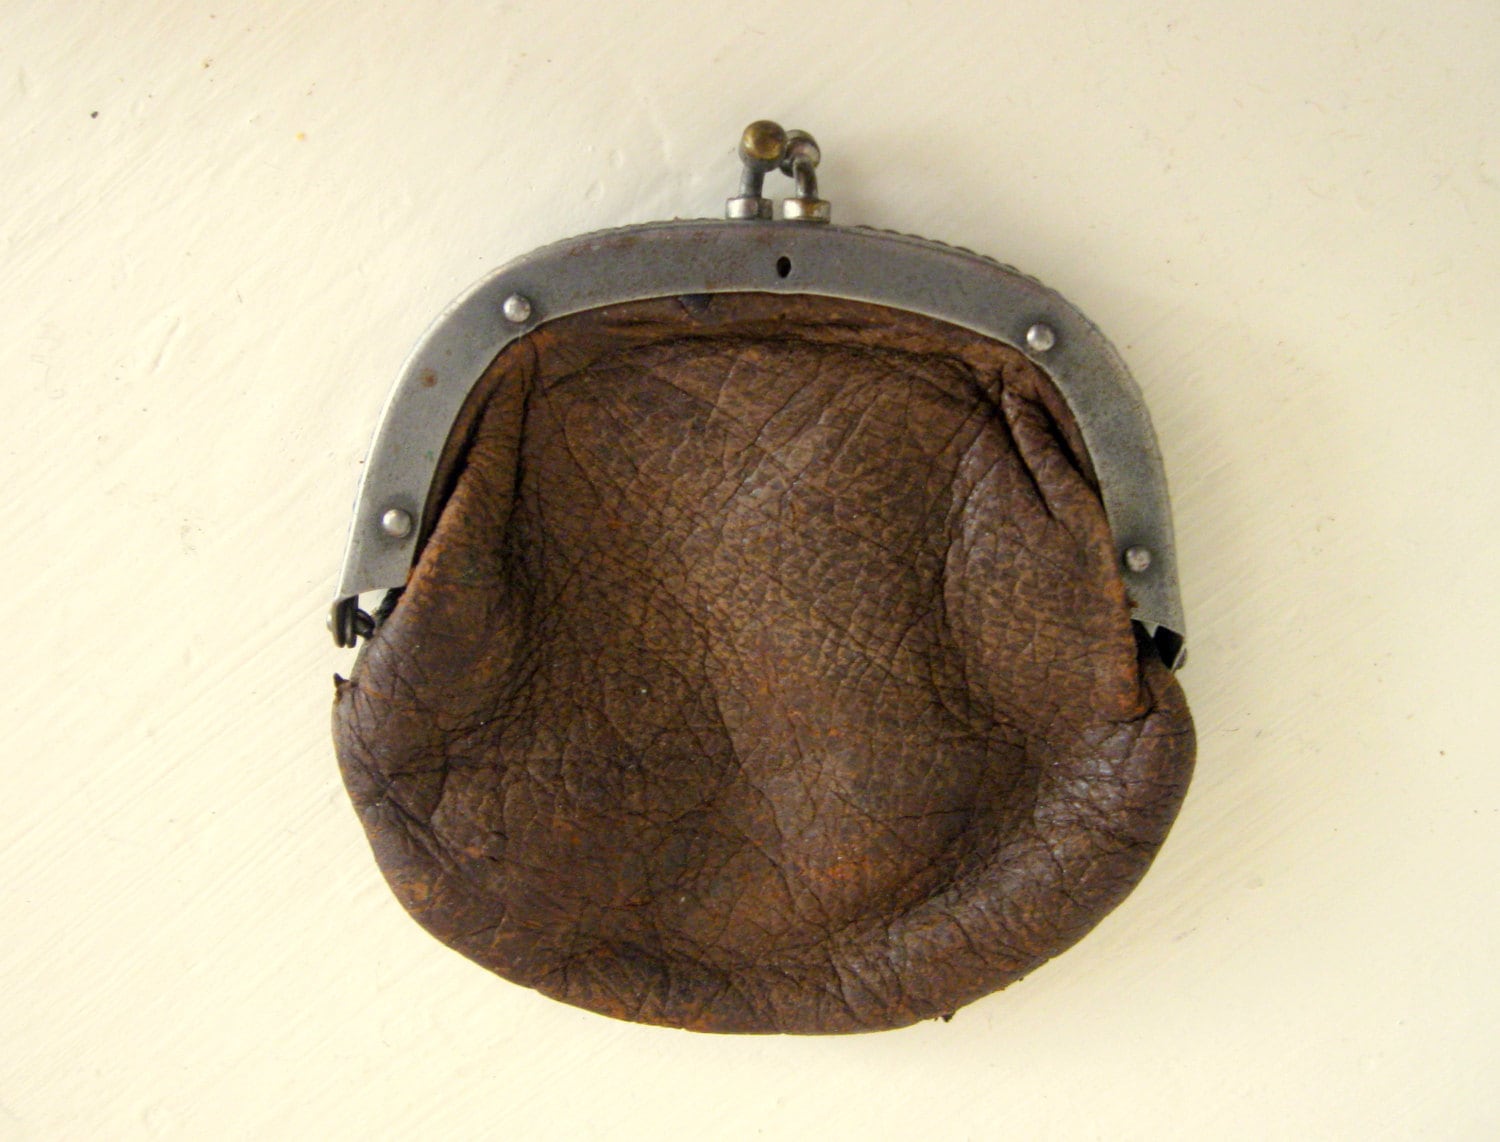 Antique Leather Coin Purse Super Worn Patina by Somethingcharming